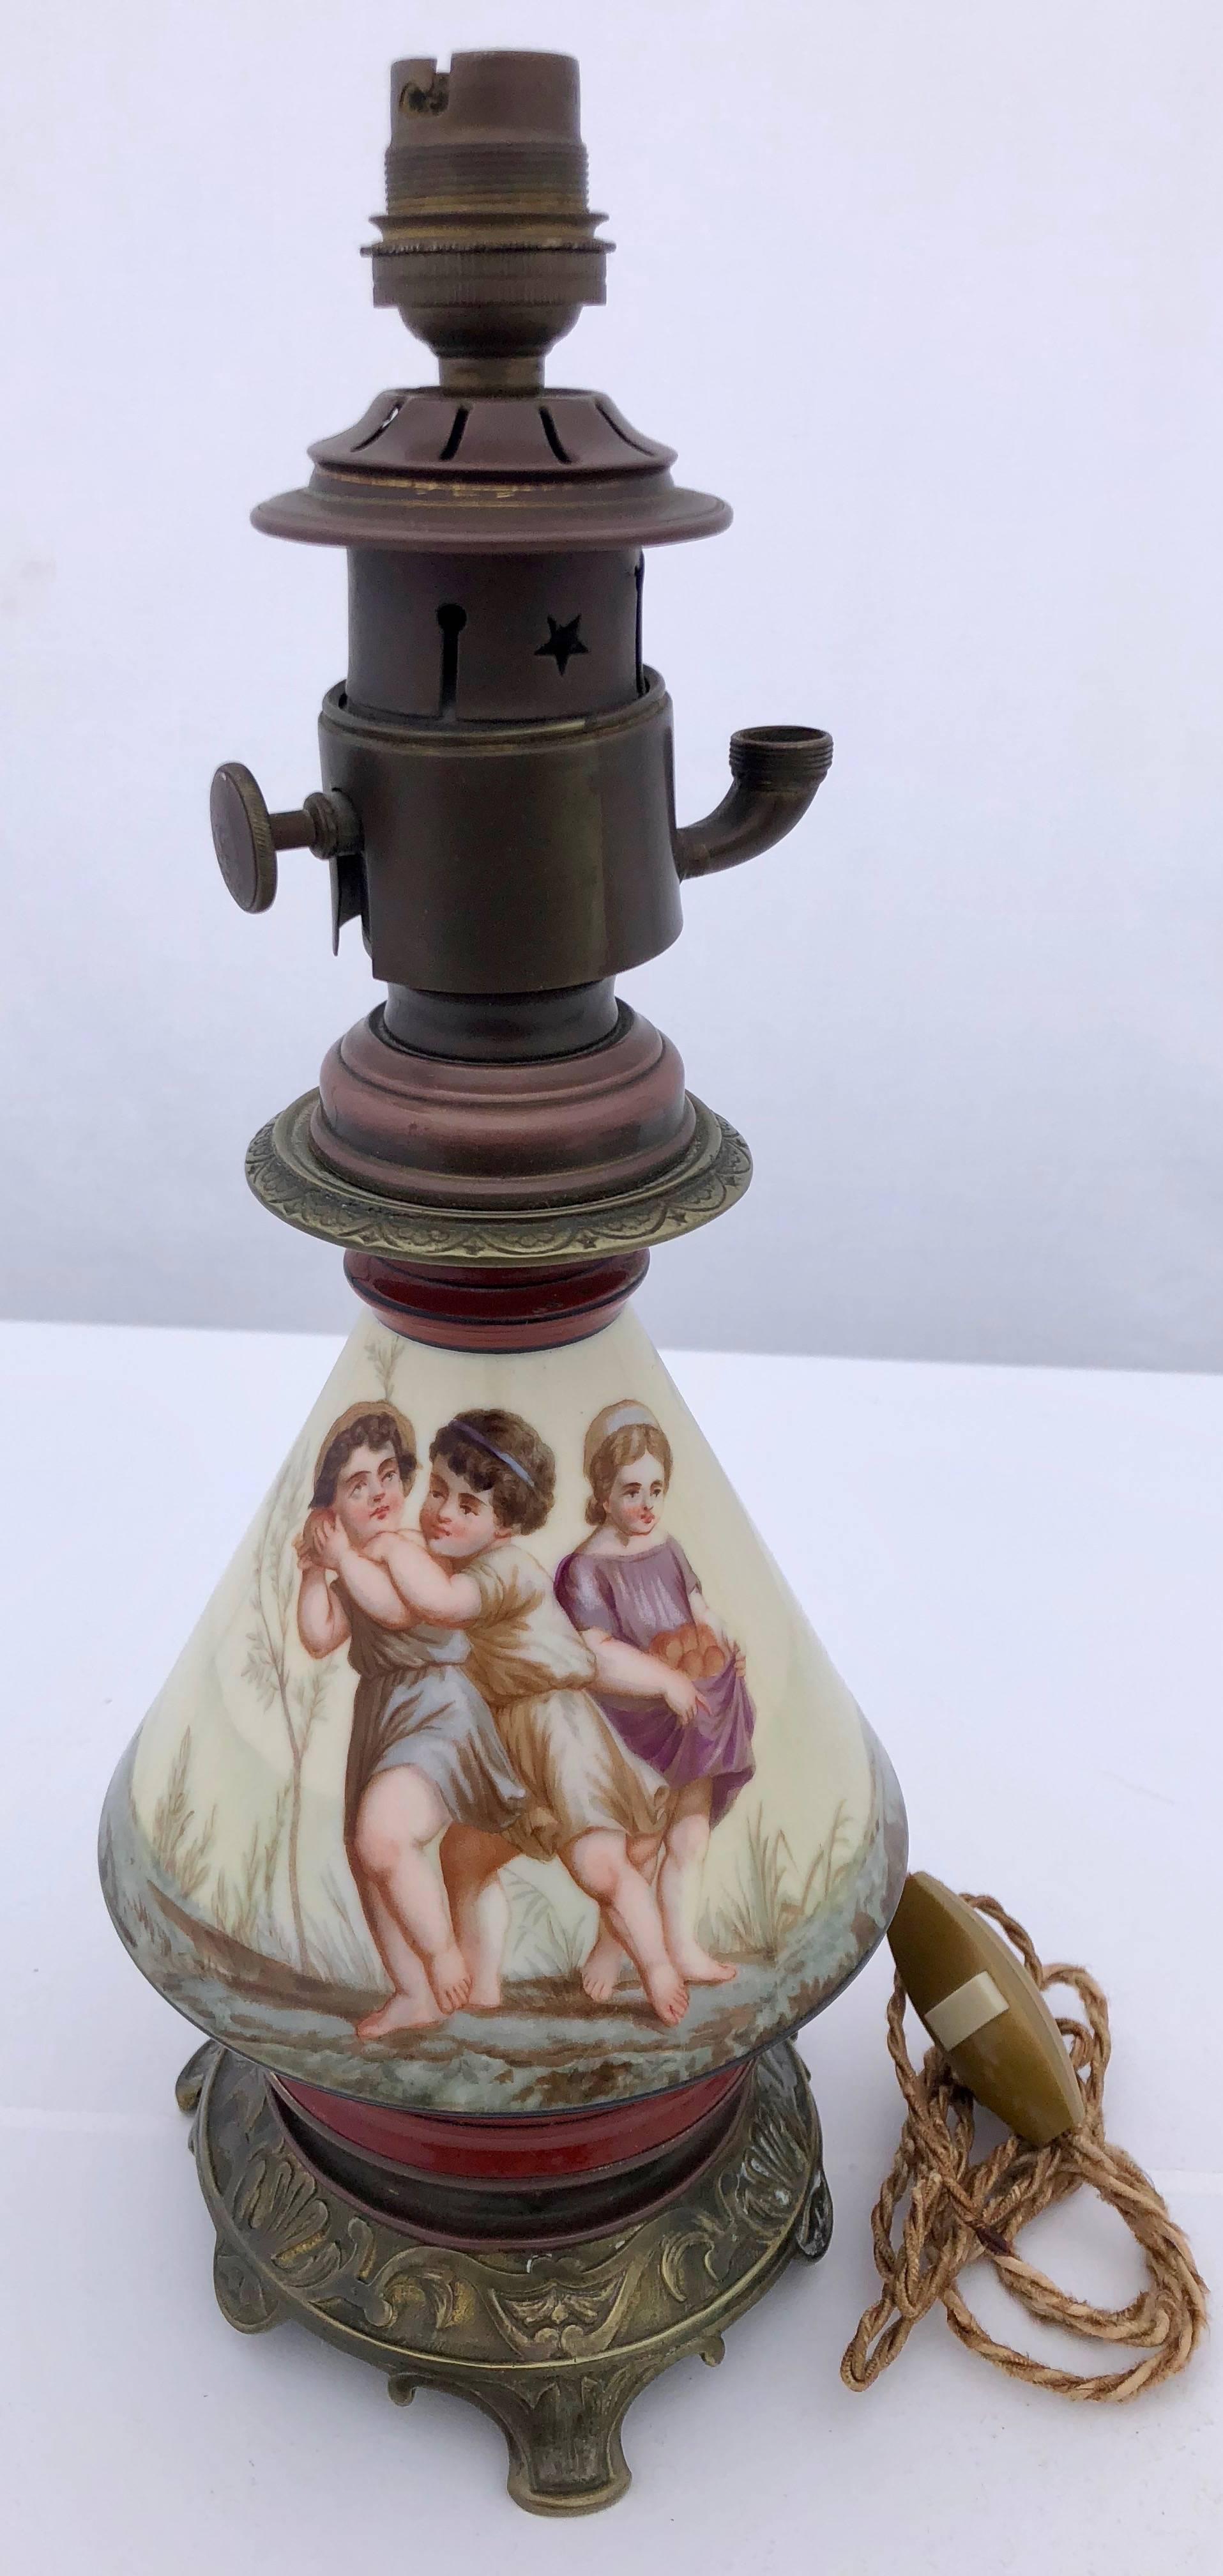 This is a gorgeous lamp with two different hand-painted scenes of children picking fruit. The colors are vibrant and the painted children's faces are exquisite. The lamp stand is metal in an antique brass color and the lamp hardware is metal in a